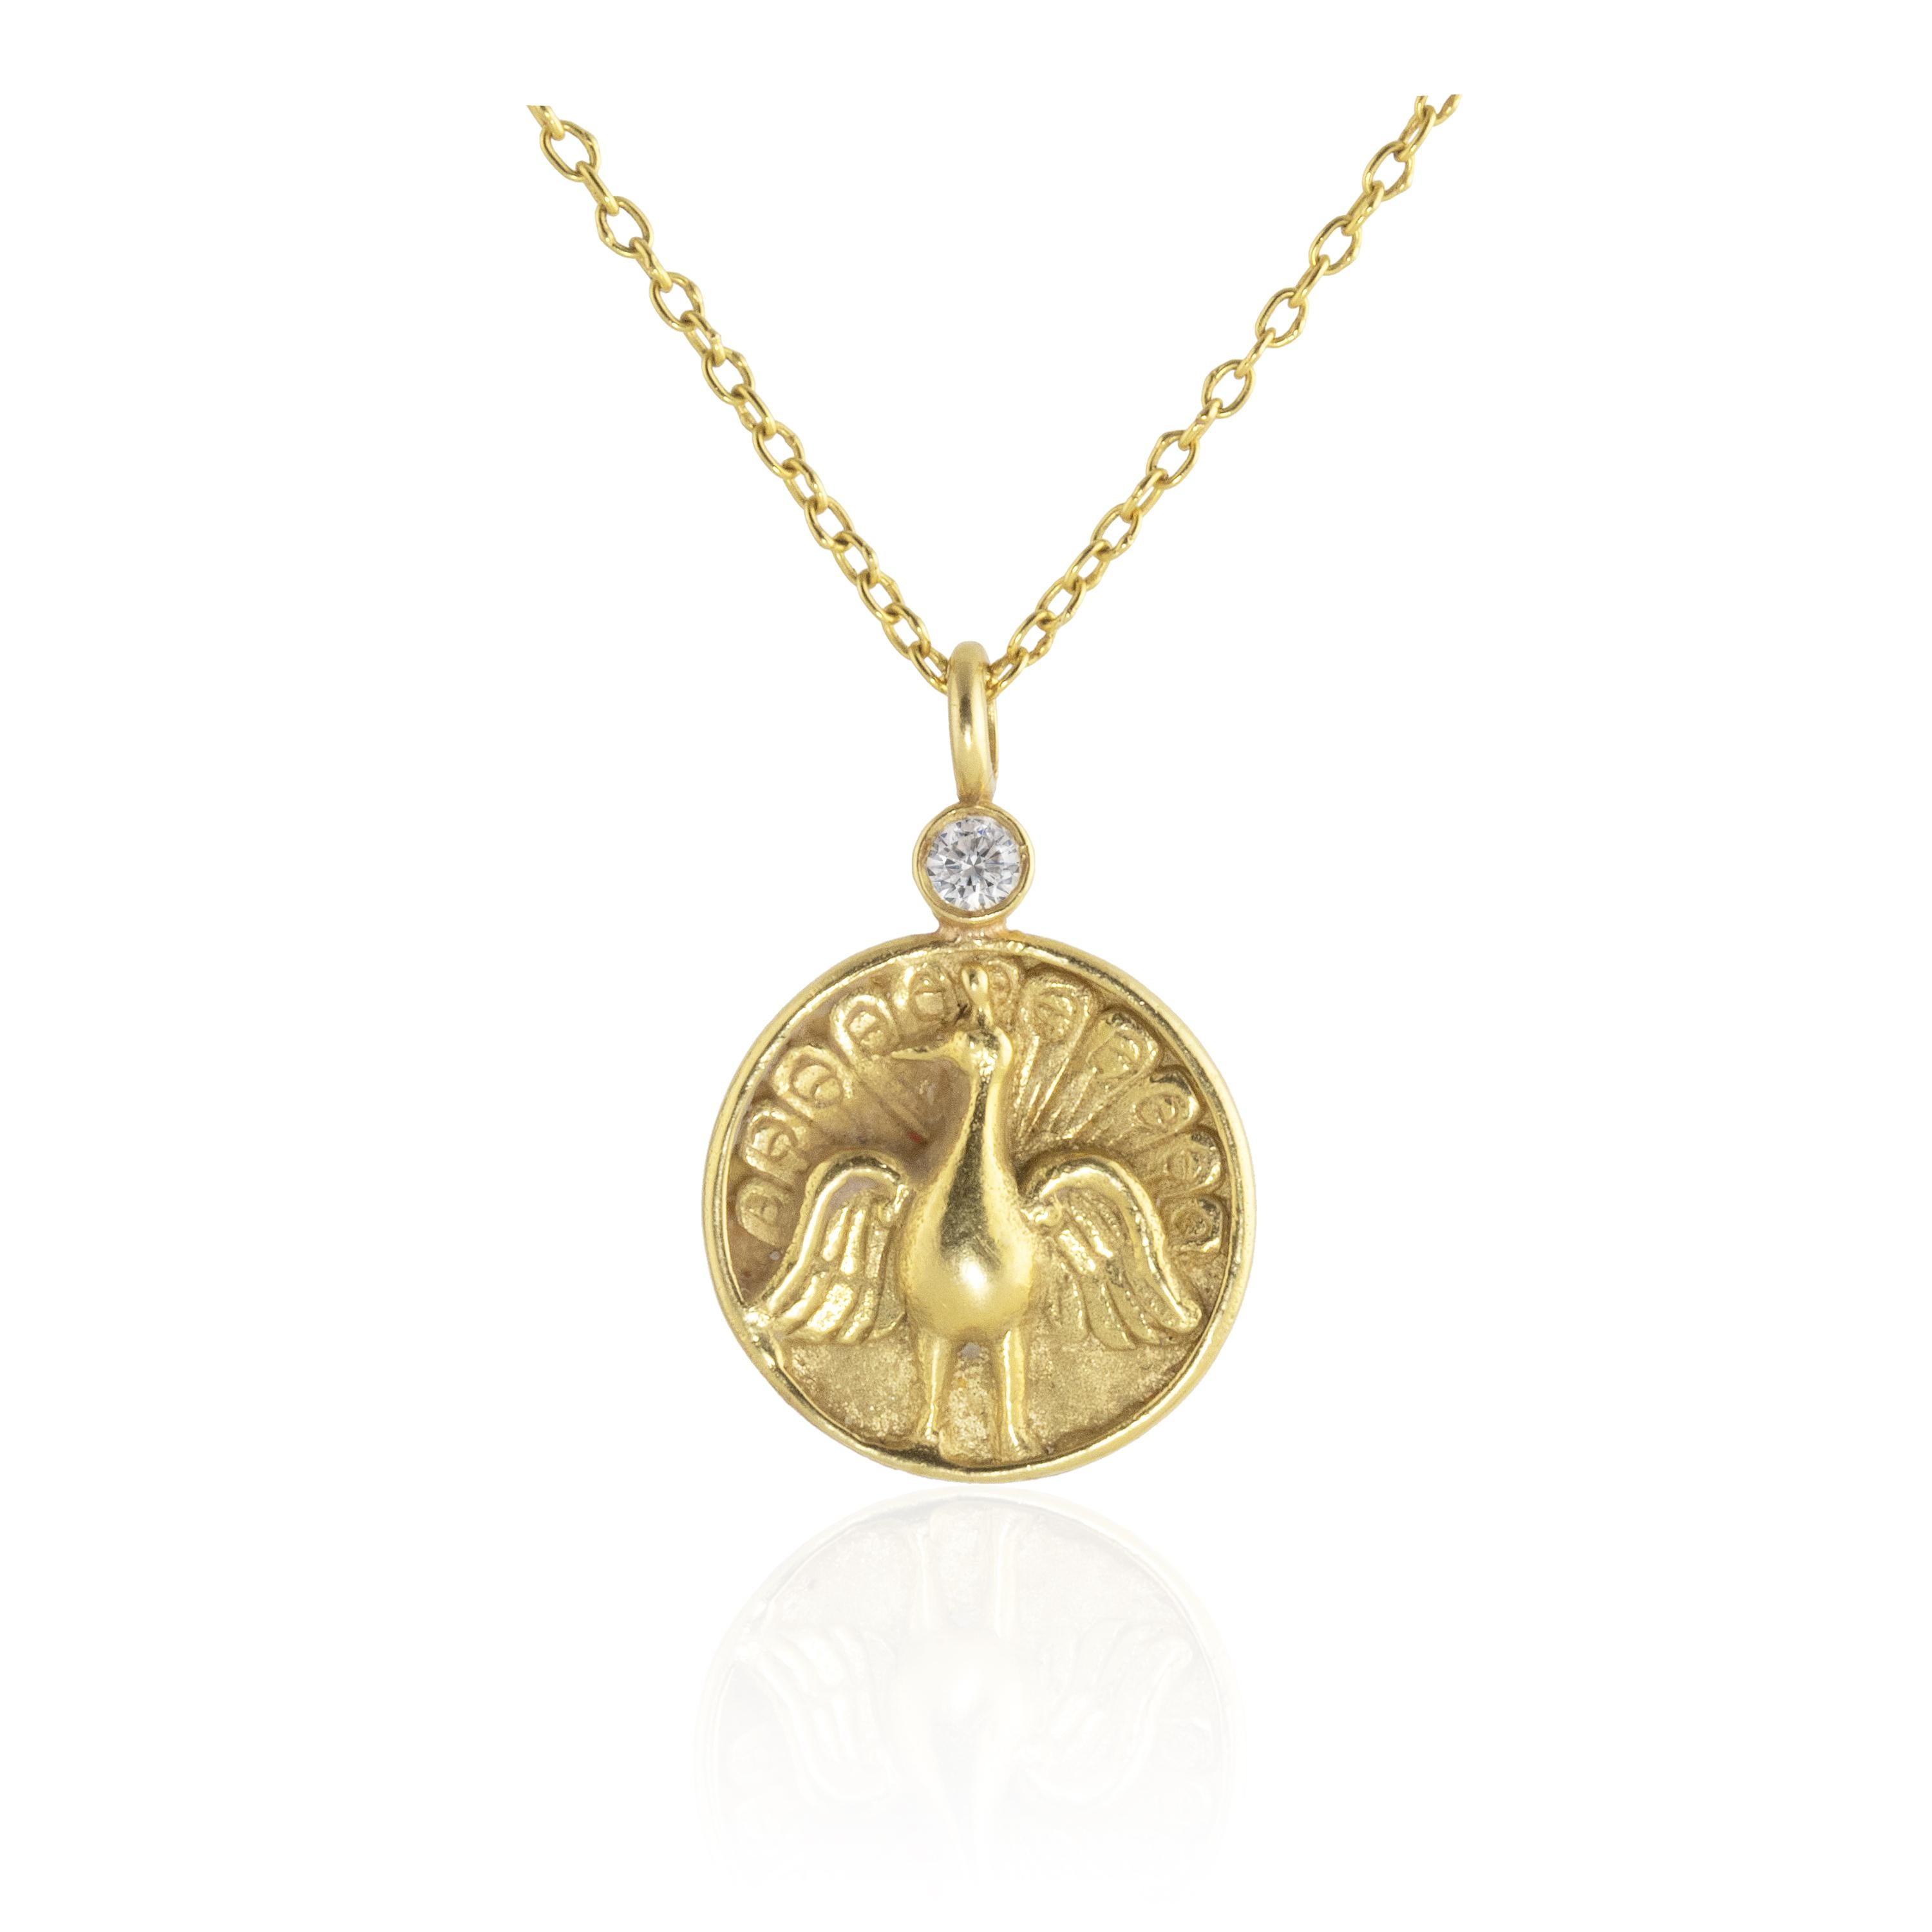 In partnership with The Turquoise Mountain Myanmar Jewellery Project, Ico & the Bird has created a series of good luck charms and pendants based on ancient Burmese Zodiac.
Conceived by the Monks of Ancient Burma and called the ‘Mahabote’ (Little